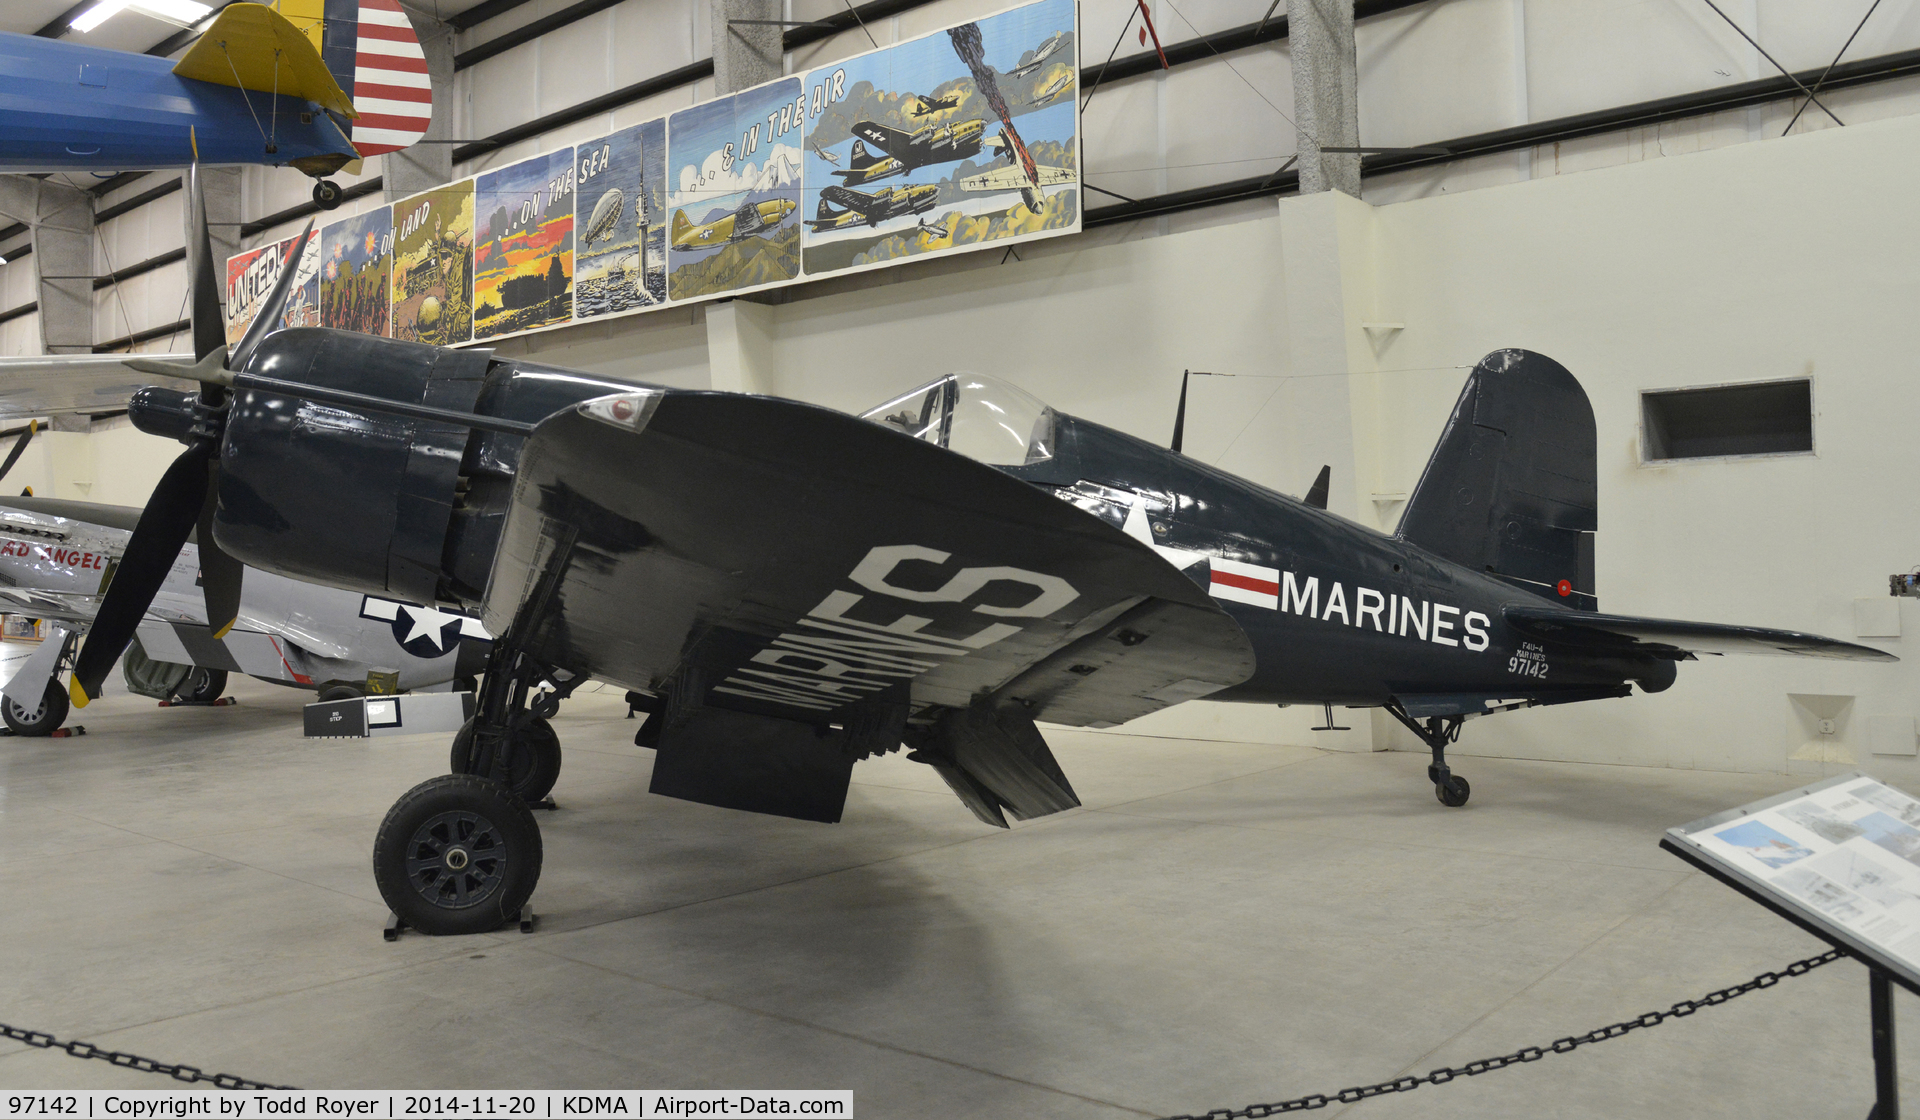 97142, Vought F4U-4 Corsair C/N 9296, On display at the Pima Air and Space Museum